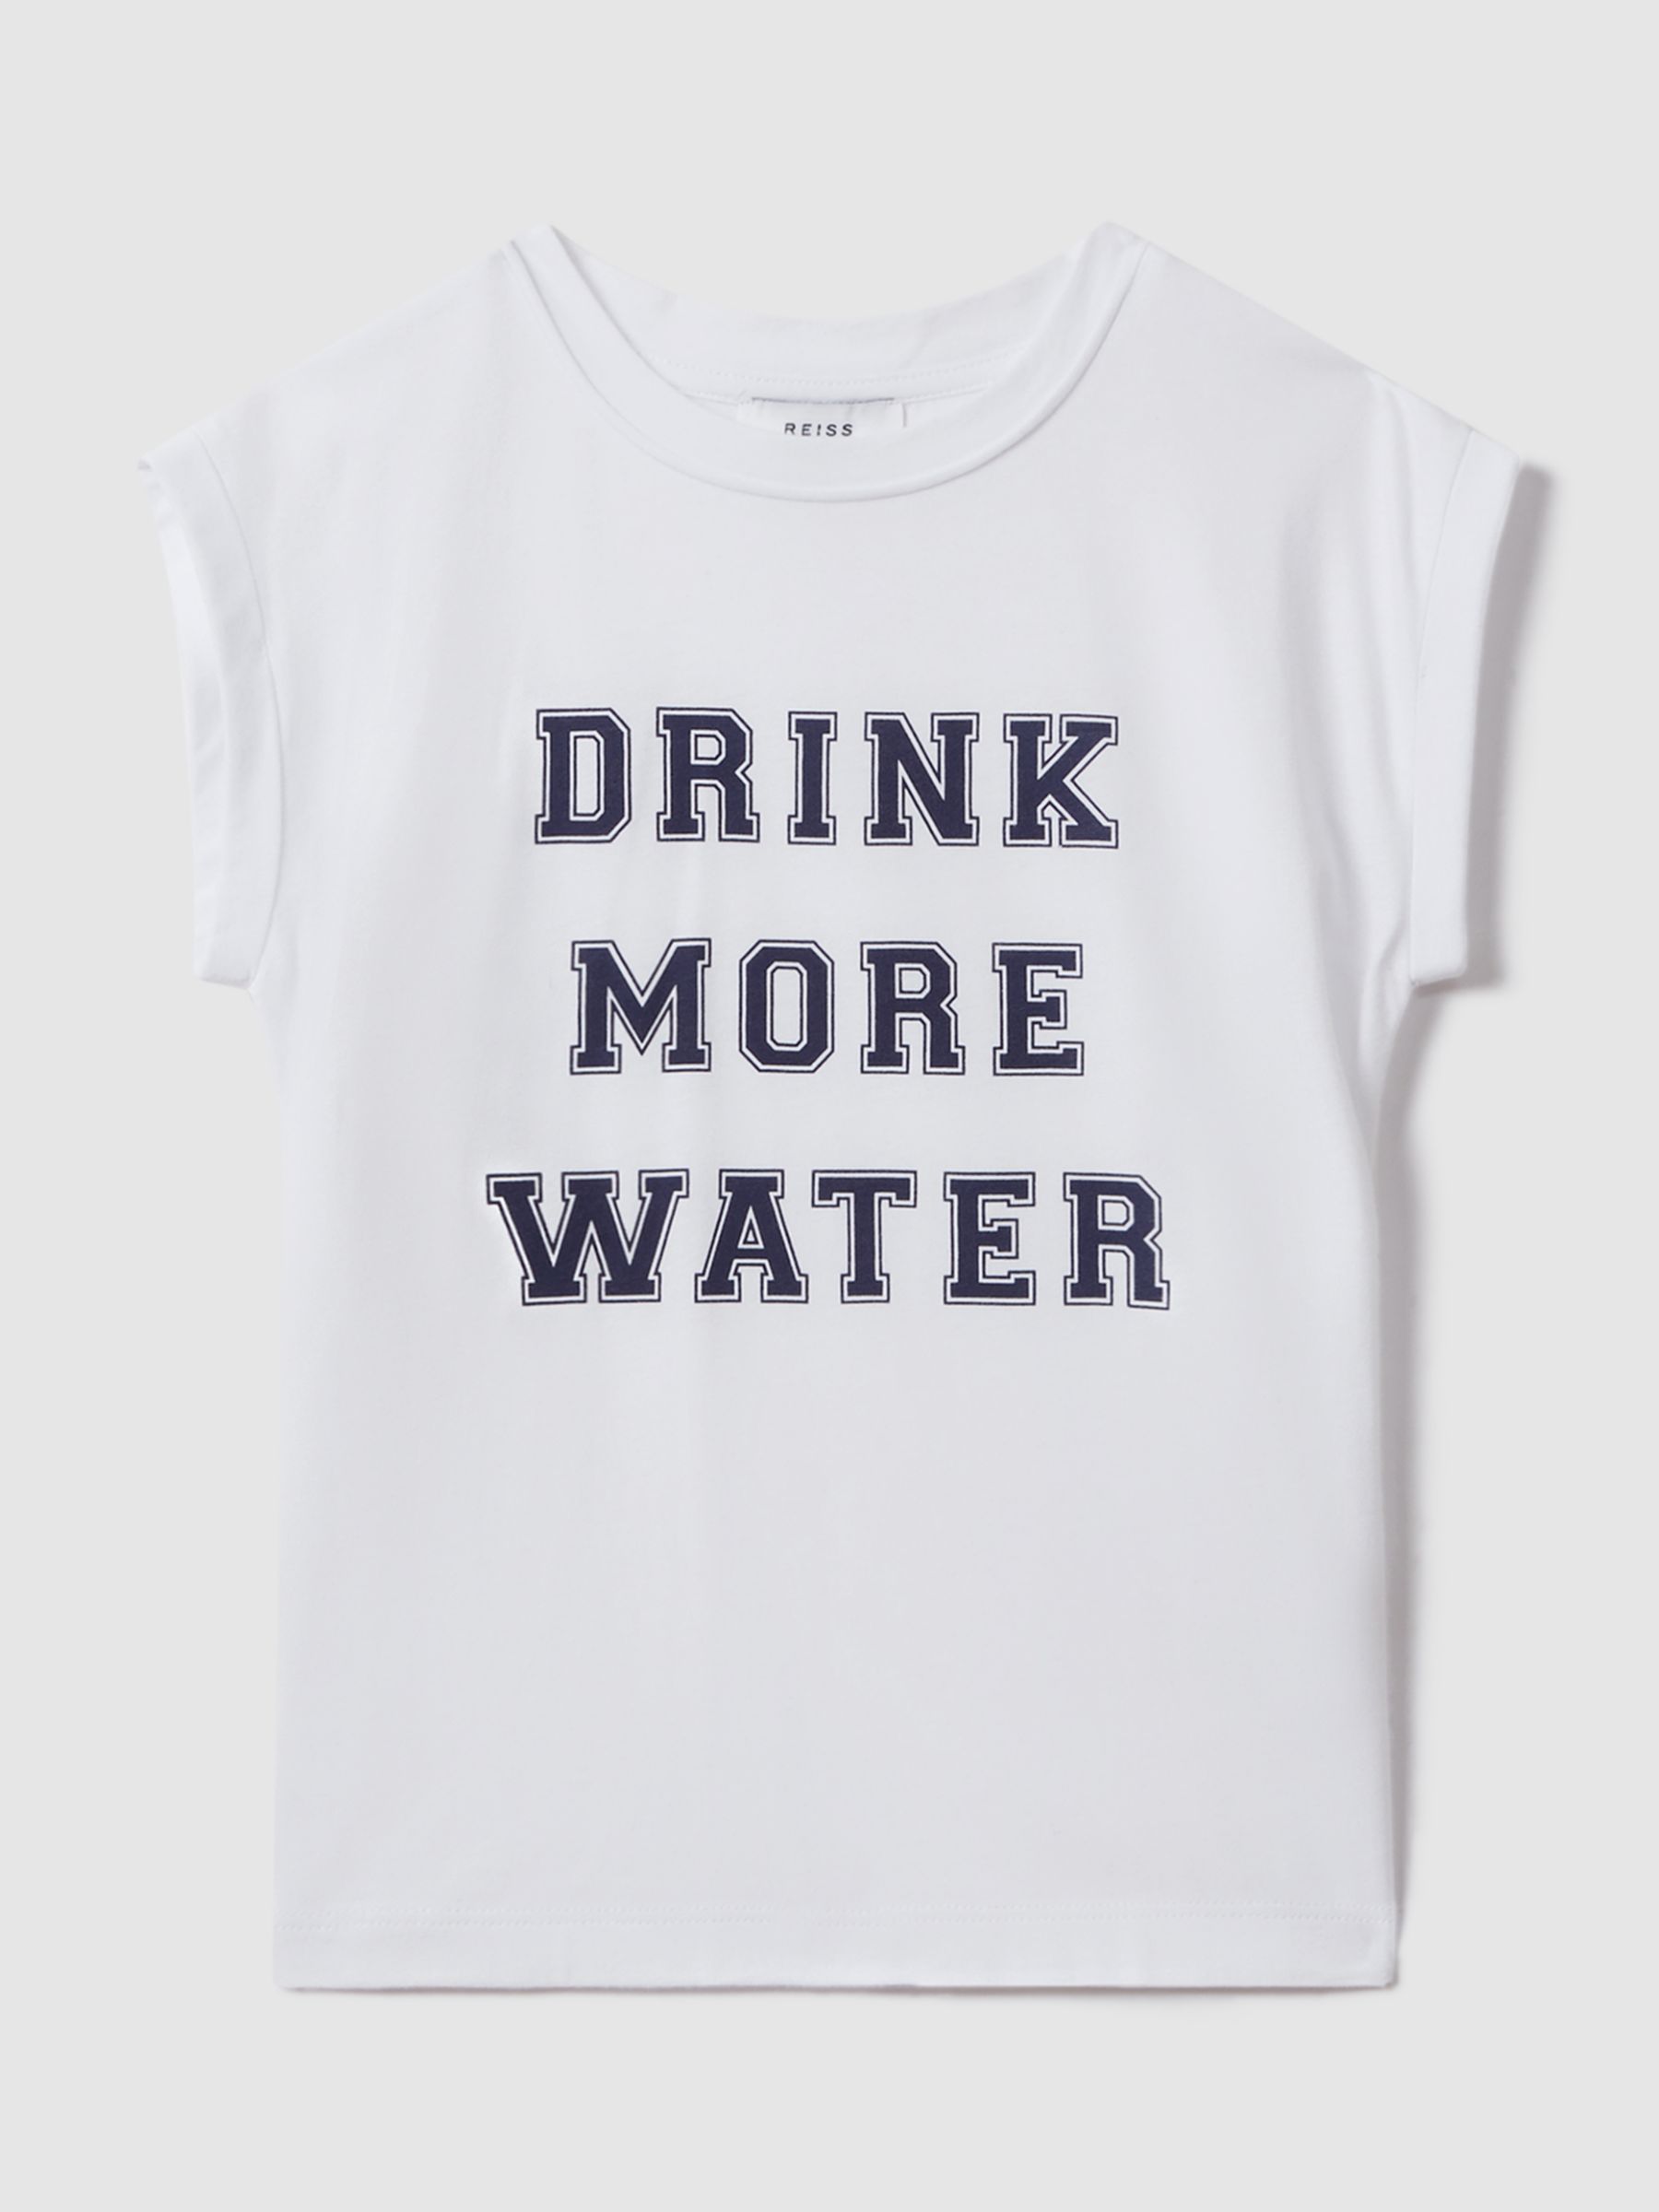 Buy Reiss Kids' Tereza Drink More Water T-Shirt, Ivory Online at johnlewis.com